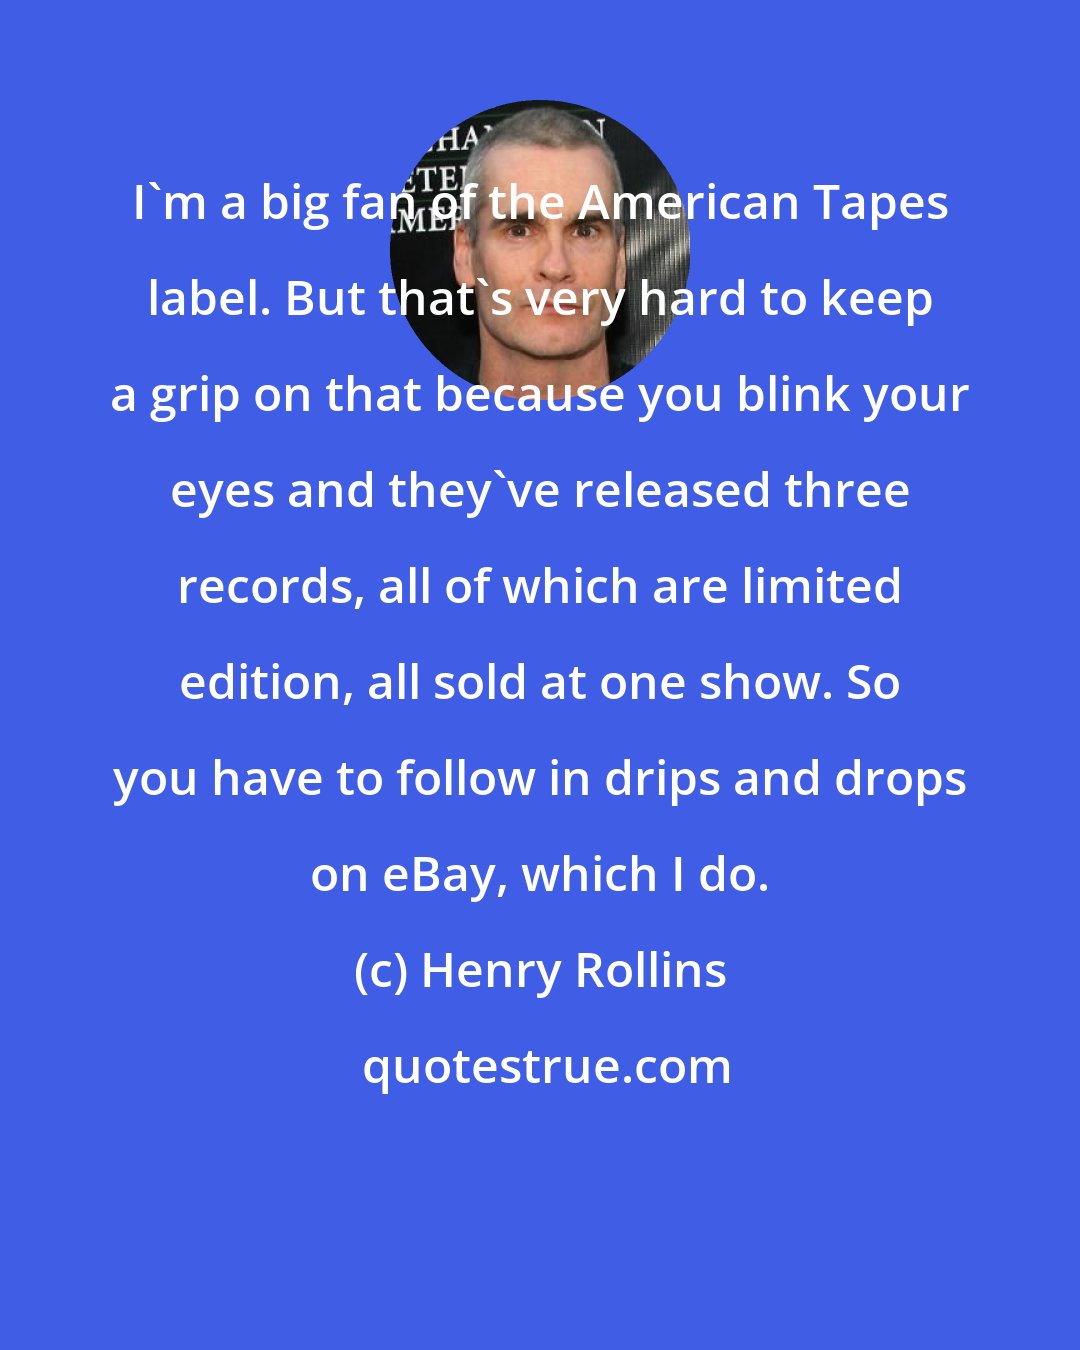 Henry Rollins: I'm a big fan of the American Tapes label. But that's very hard to keep a grip on that because you blink your eyes and they've released three records, all of which are limited edition, all sold at one show. So you have to follow in drips and drops on eBay, which I do.